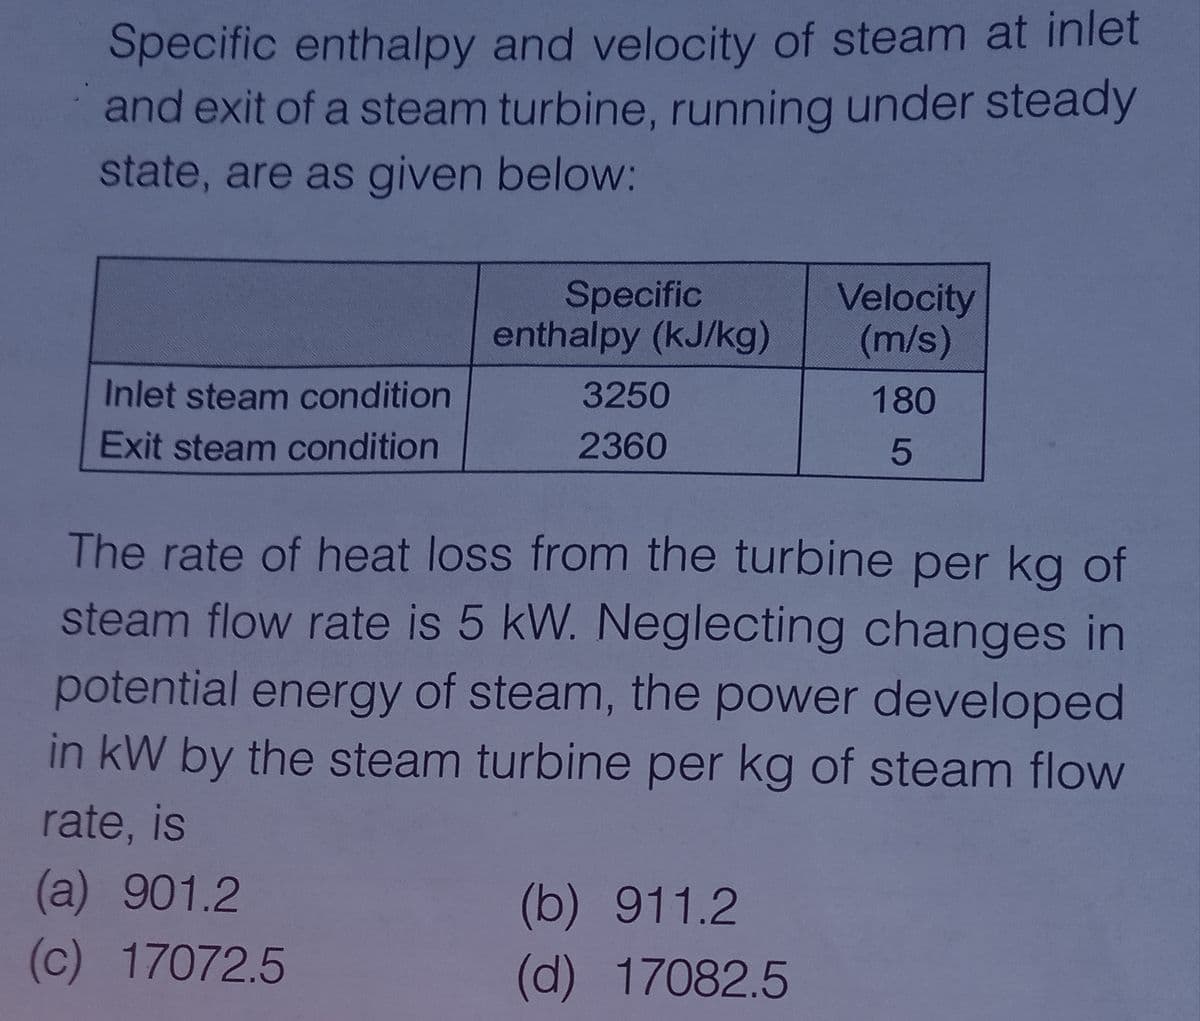 Specific enthalpy and velocity of steam at inlet
and exit of a steam turbine, running under steady
state, are as given below:
Specific
enthalpy (kJ/kg)
Velocity
(m/s)
Inlet steam condition
3250
180
Exit steam condition
2360
The rate of heat loss from the turbine per kg of
steam flow rate is 5 kW. Neglecting changes in
potential energy of steam, the power developed
in kW by the steam turbine per kg of steam flow
rate, is
(a) 901.2
(b) 911.2
(d) 17082.5
(c) 17072.5
